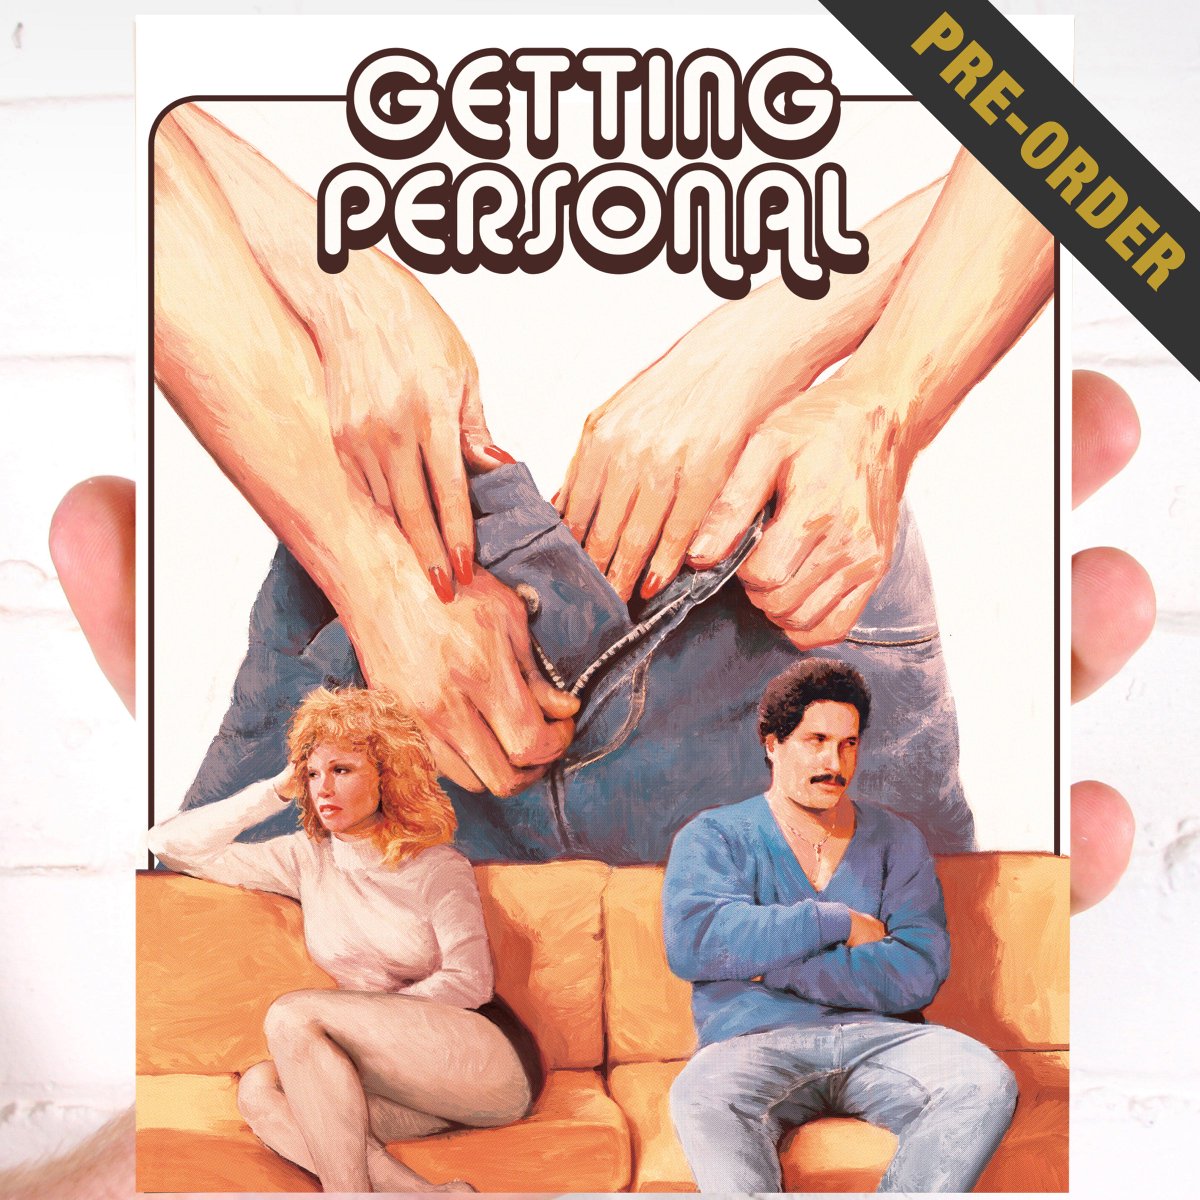 From the dark and perverse mind of Ron Sullivan (Henri Pachard) comes the Blu-ray debut of GETTING PERSONAL from Quality X! Starring Colleen Brennan (Sharon Kelly) and Herschel Savage, each giving one of the most powerful performances of their careers! (Melusine.com)